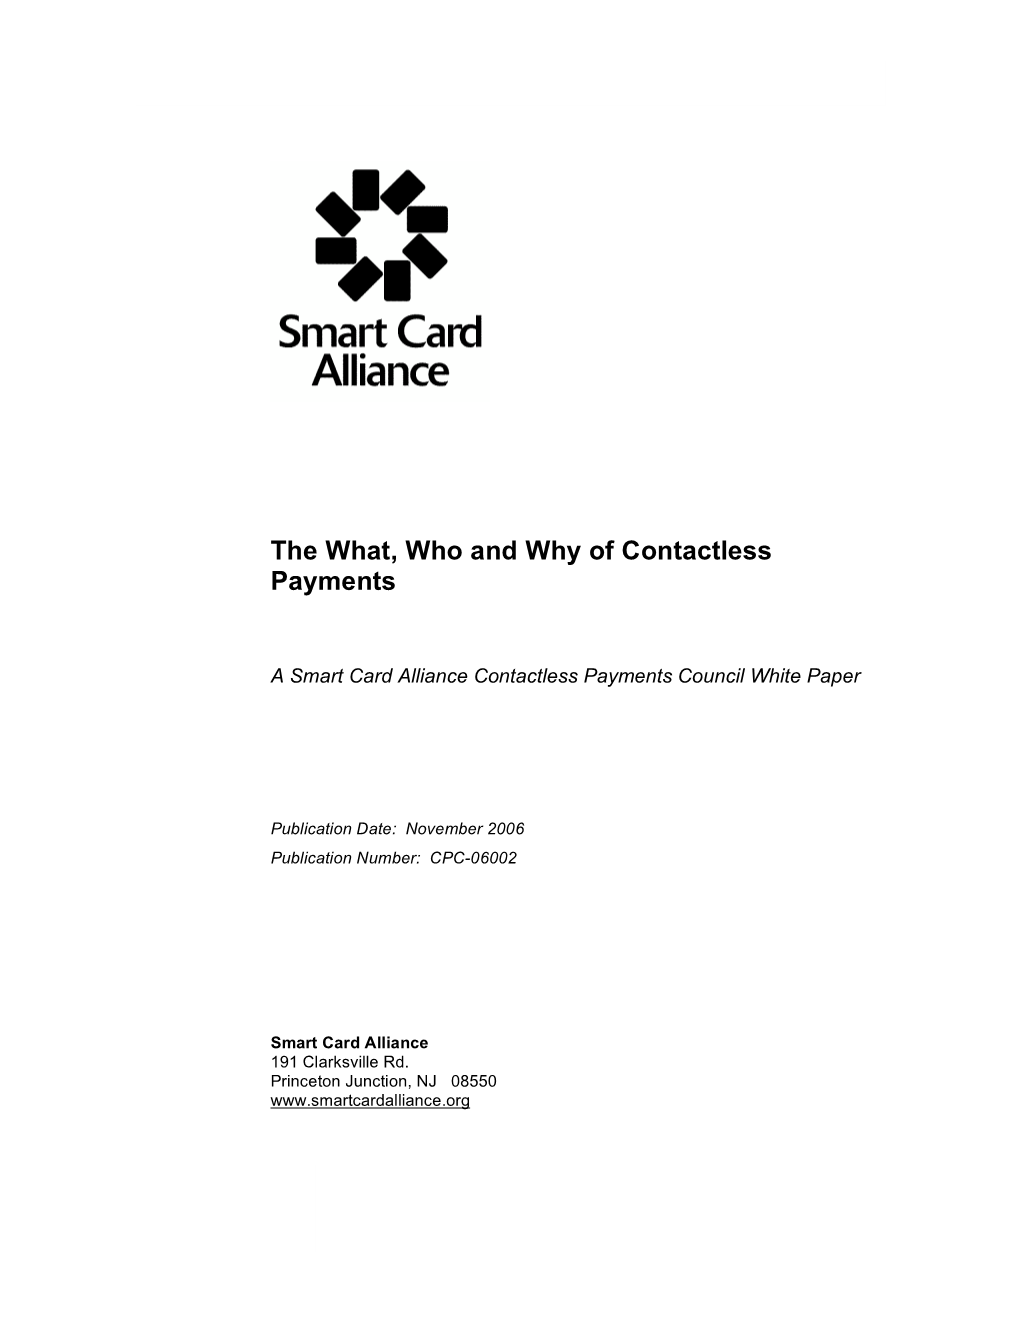 The What, Who and Why of Contactless Payments